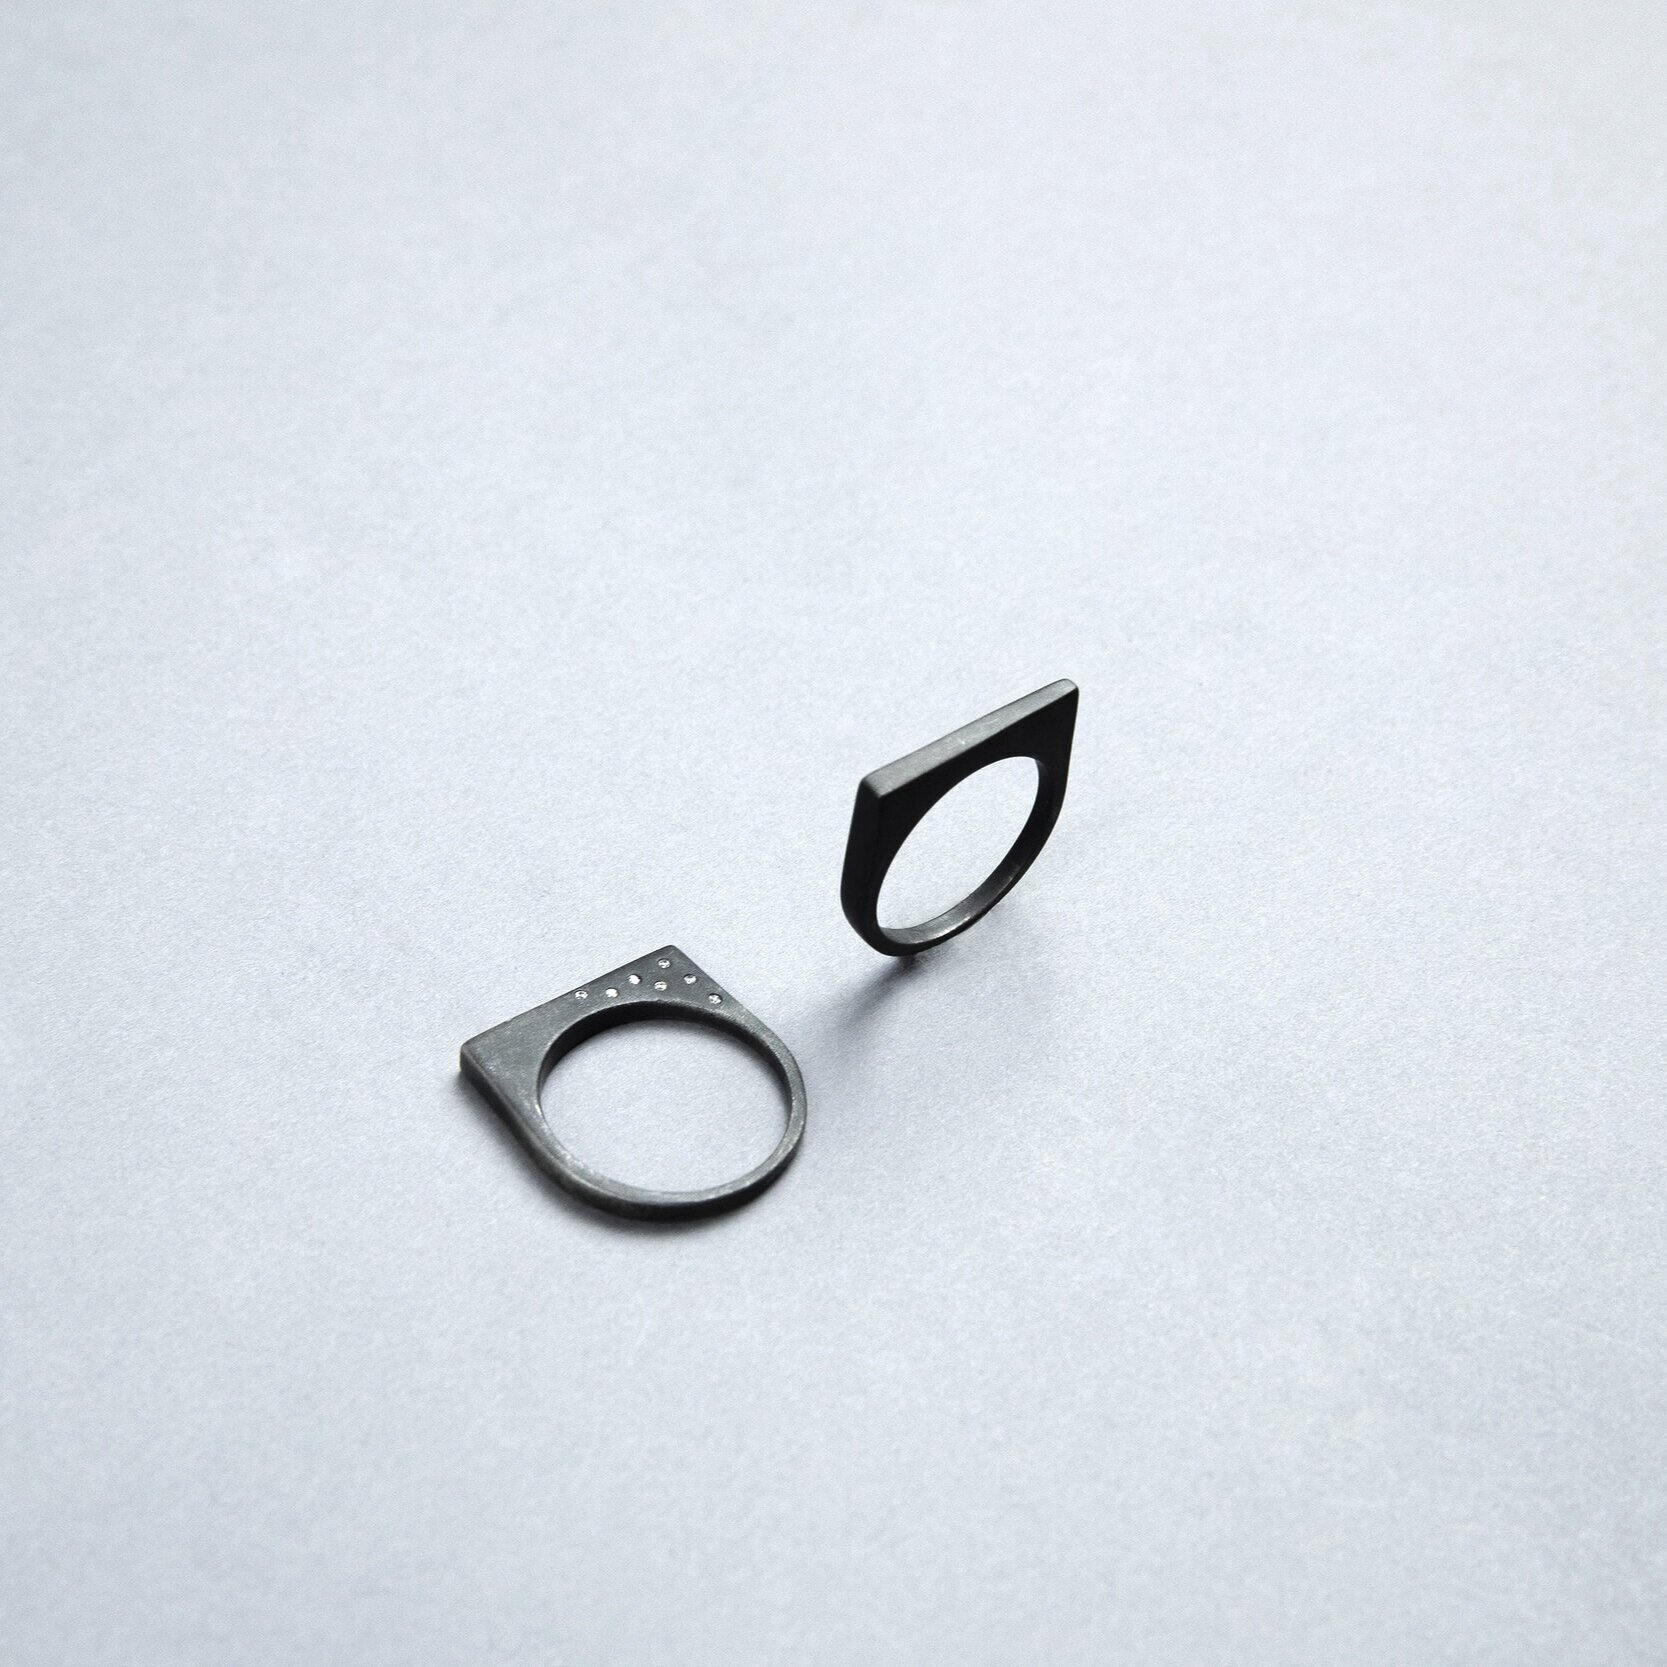 Product Photograph of Rings